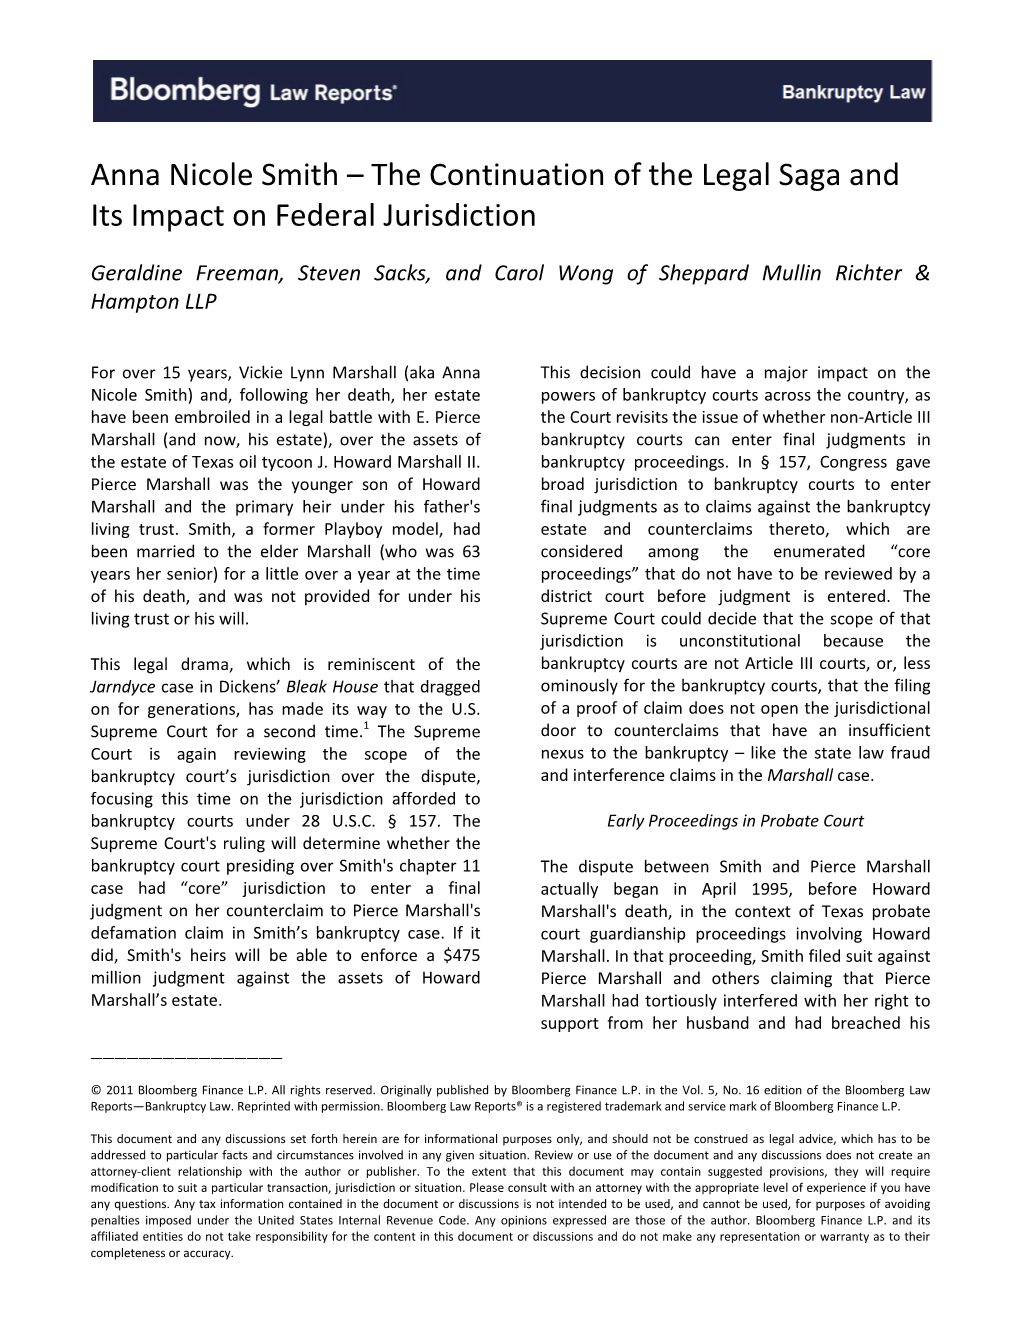 Anna Nicole Smith – the Continuation of the Legal Saga and Its Impact on Federal Jurisdiction